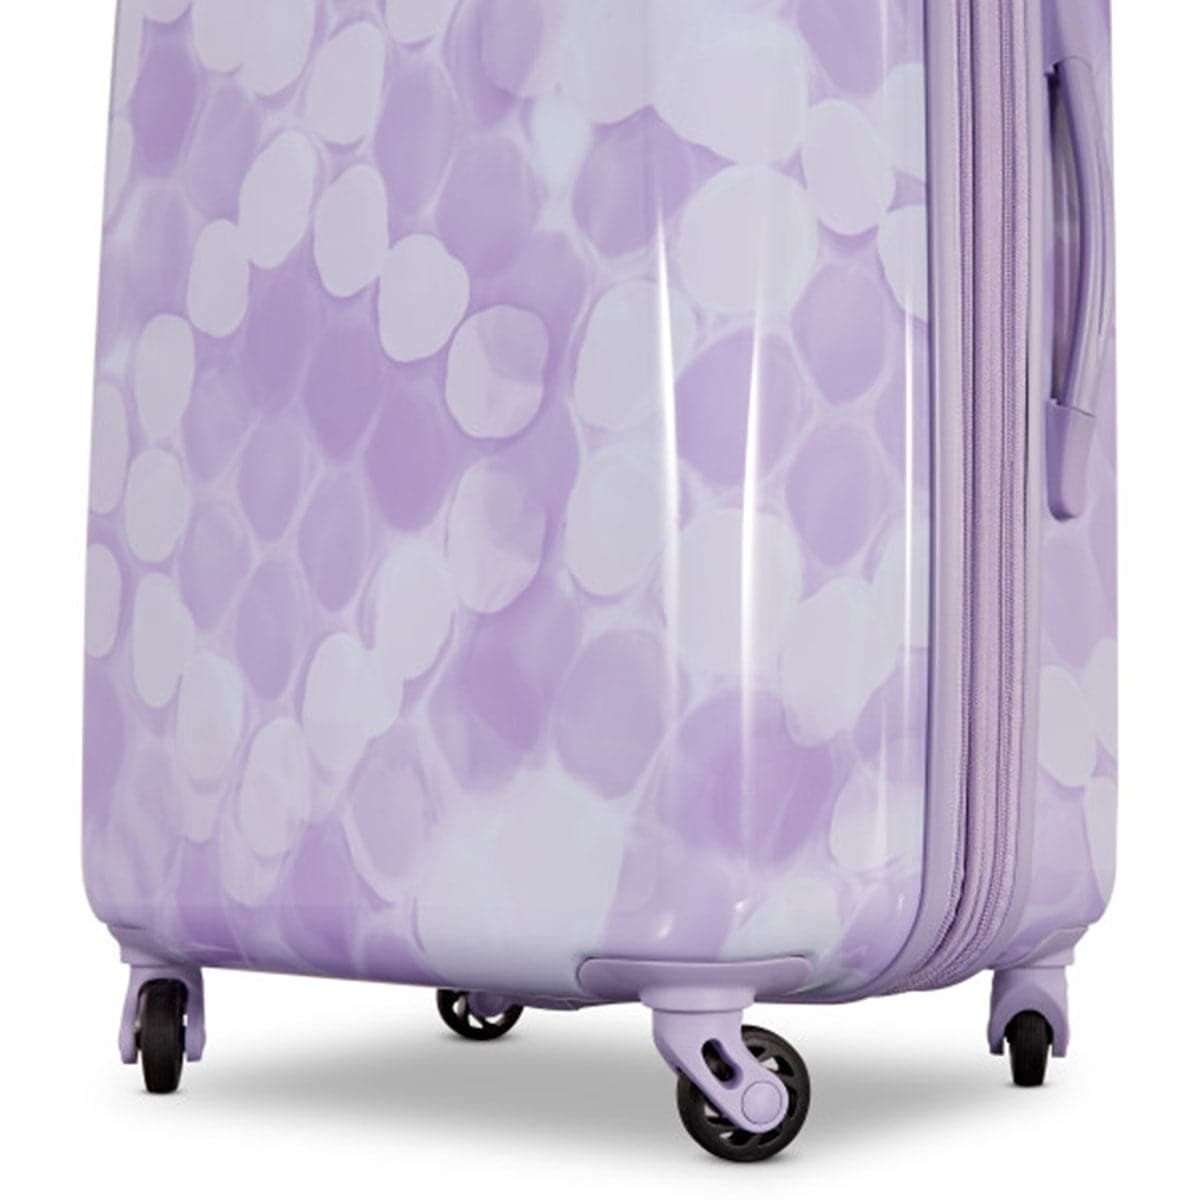 American Tourister Moonlight 24" Spinner Luggage